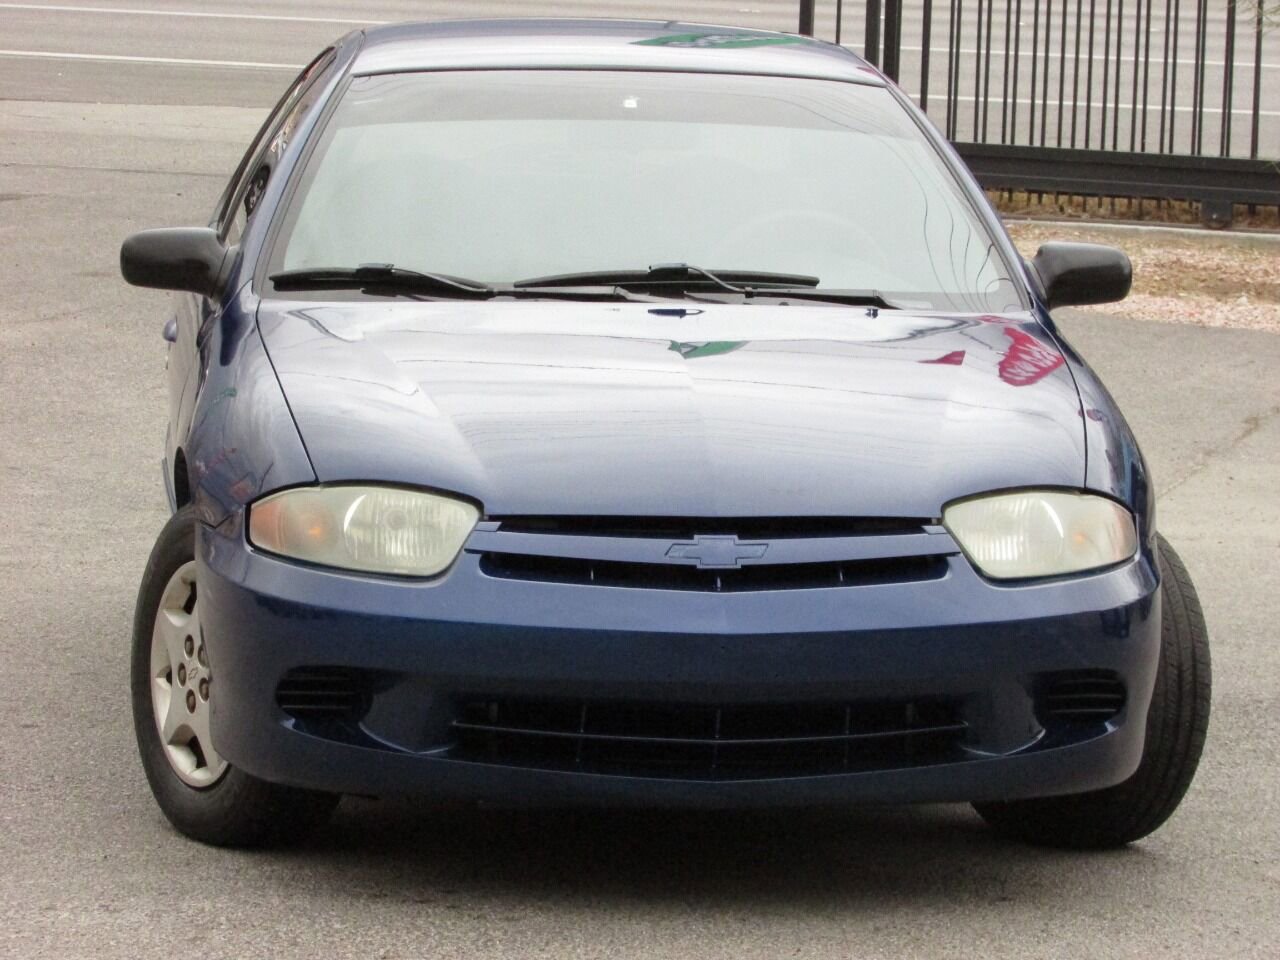 Used 2004 Chevrolet Cavalier for Sale Right Now - Autotrader